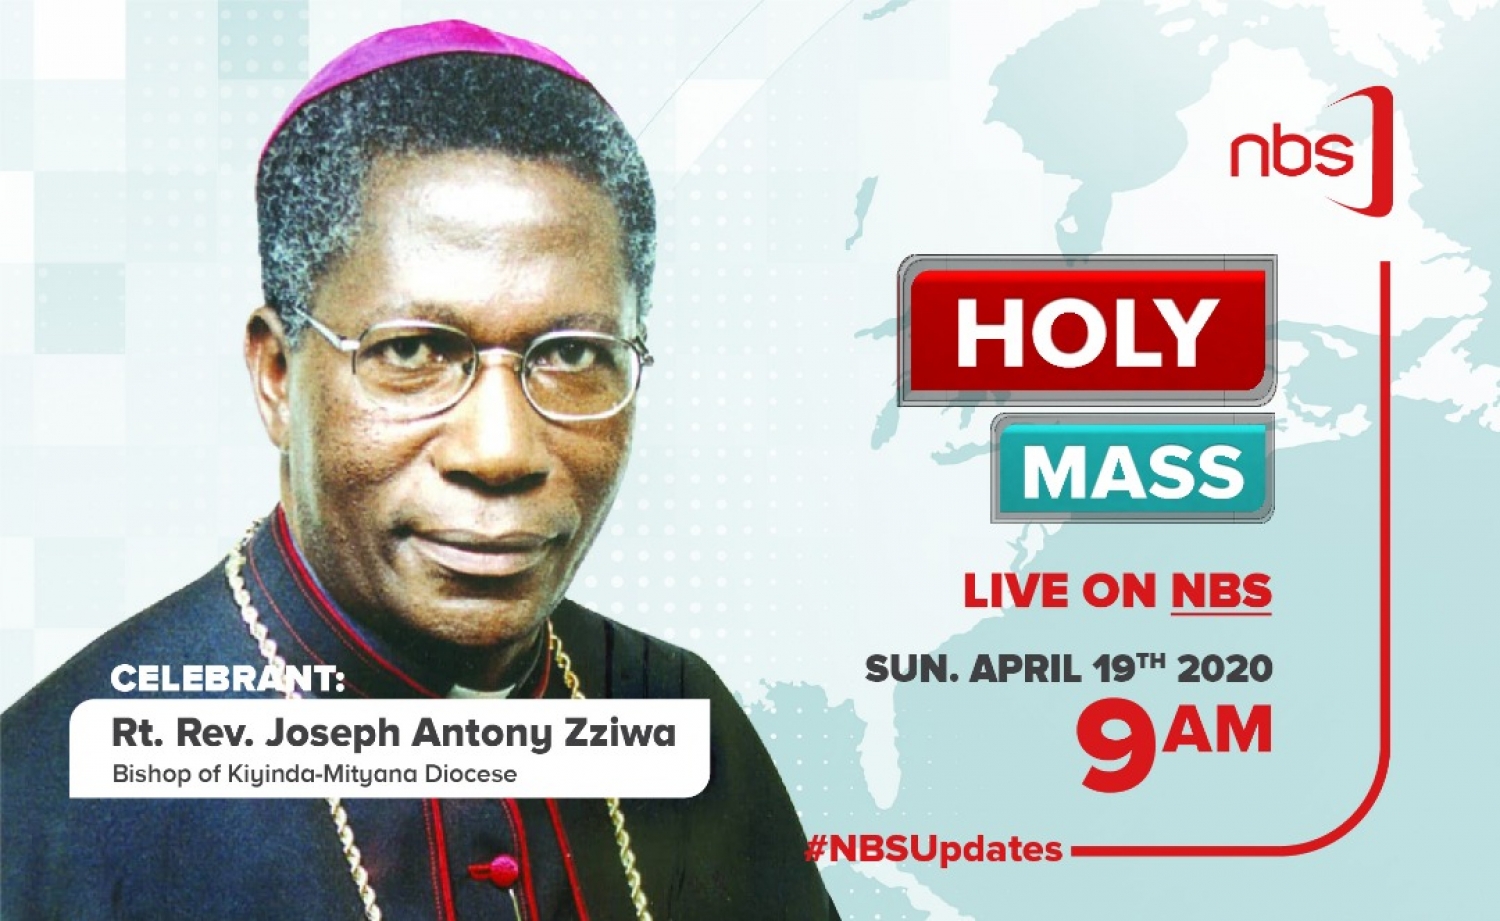 HOLY MASS LIVE ON NBS, 19TH APRIL 2020